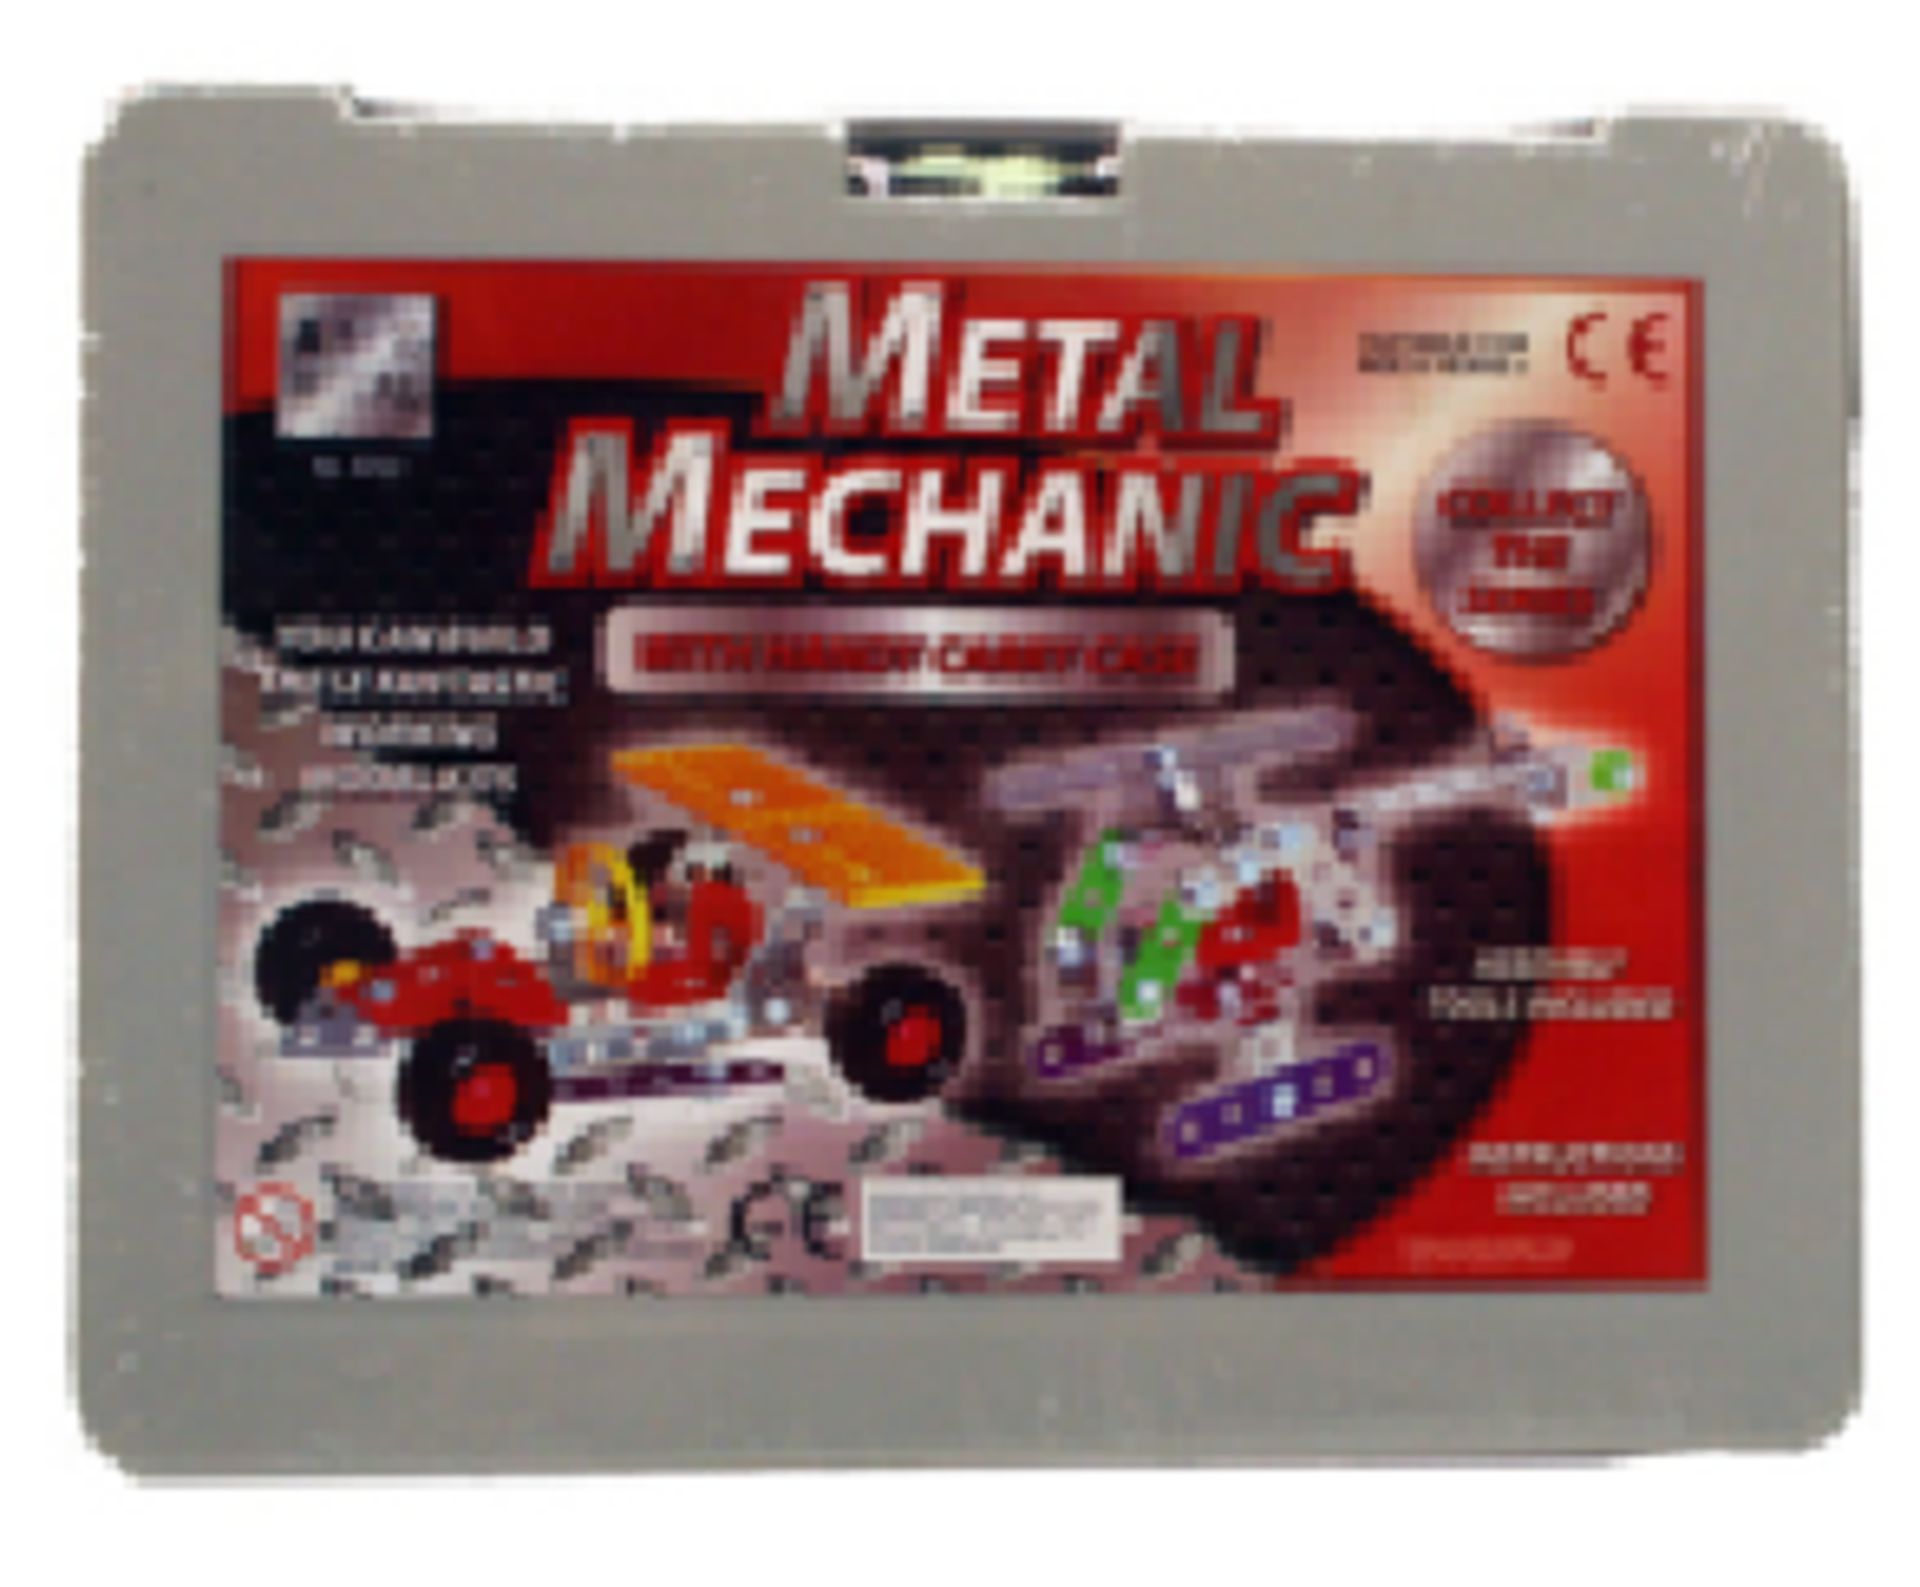 + VAT Brand New Meccano Type Contruction Kit In Carry Case With Instructions And Tools Age 6+